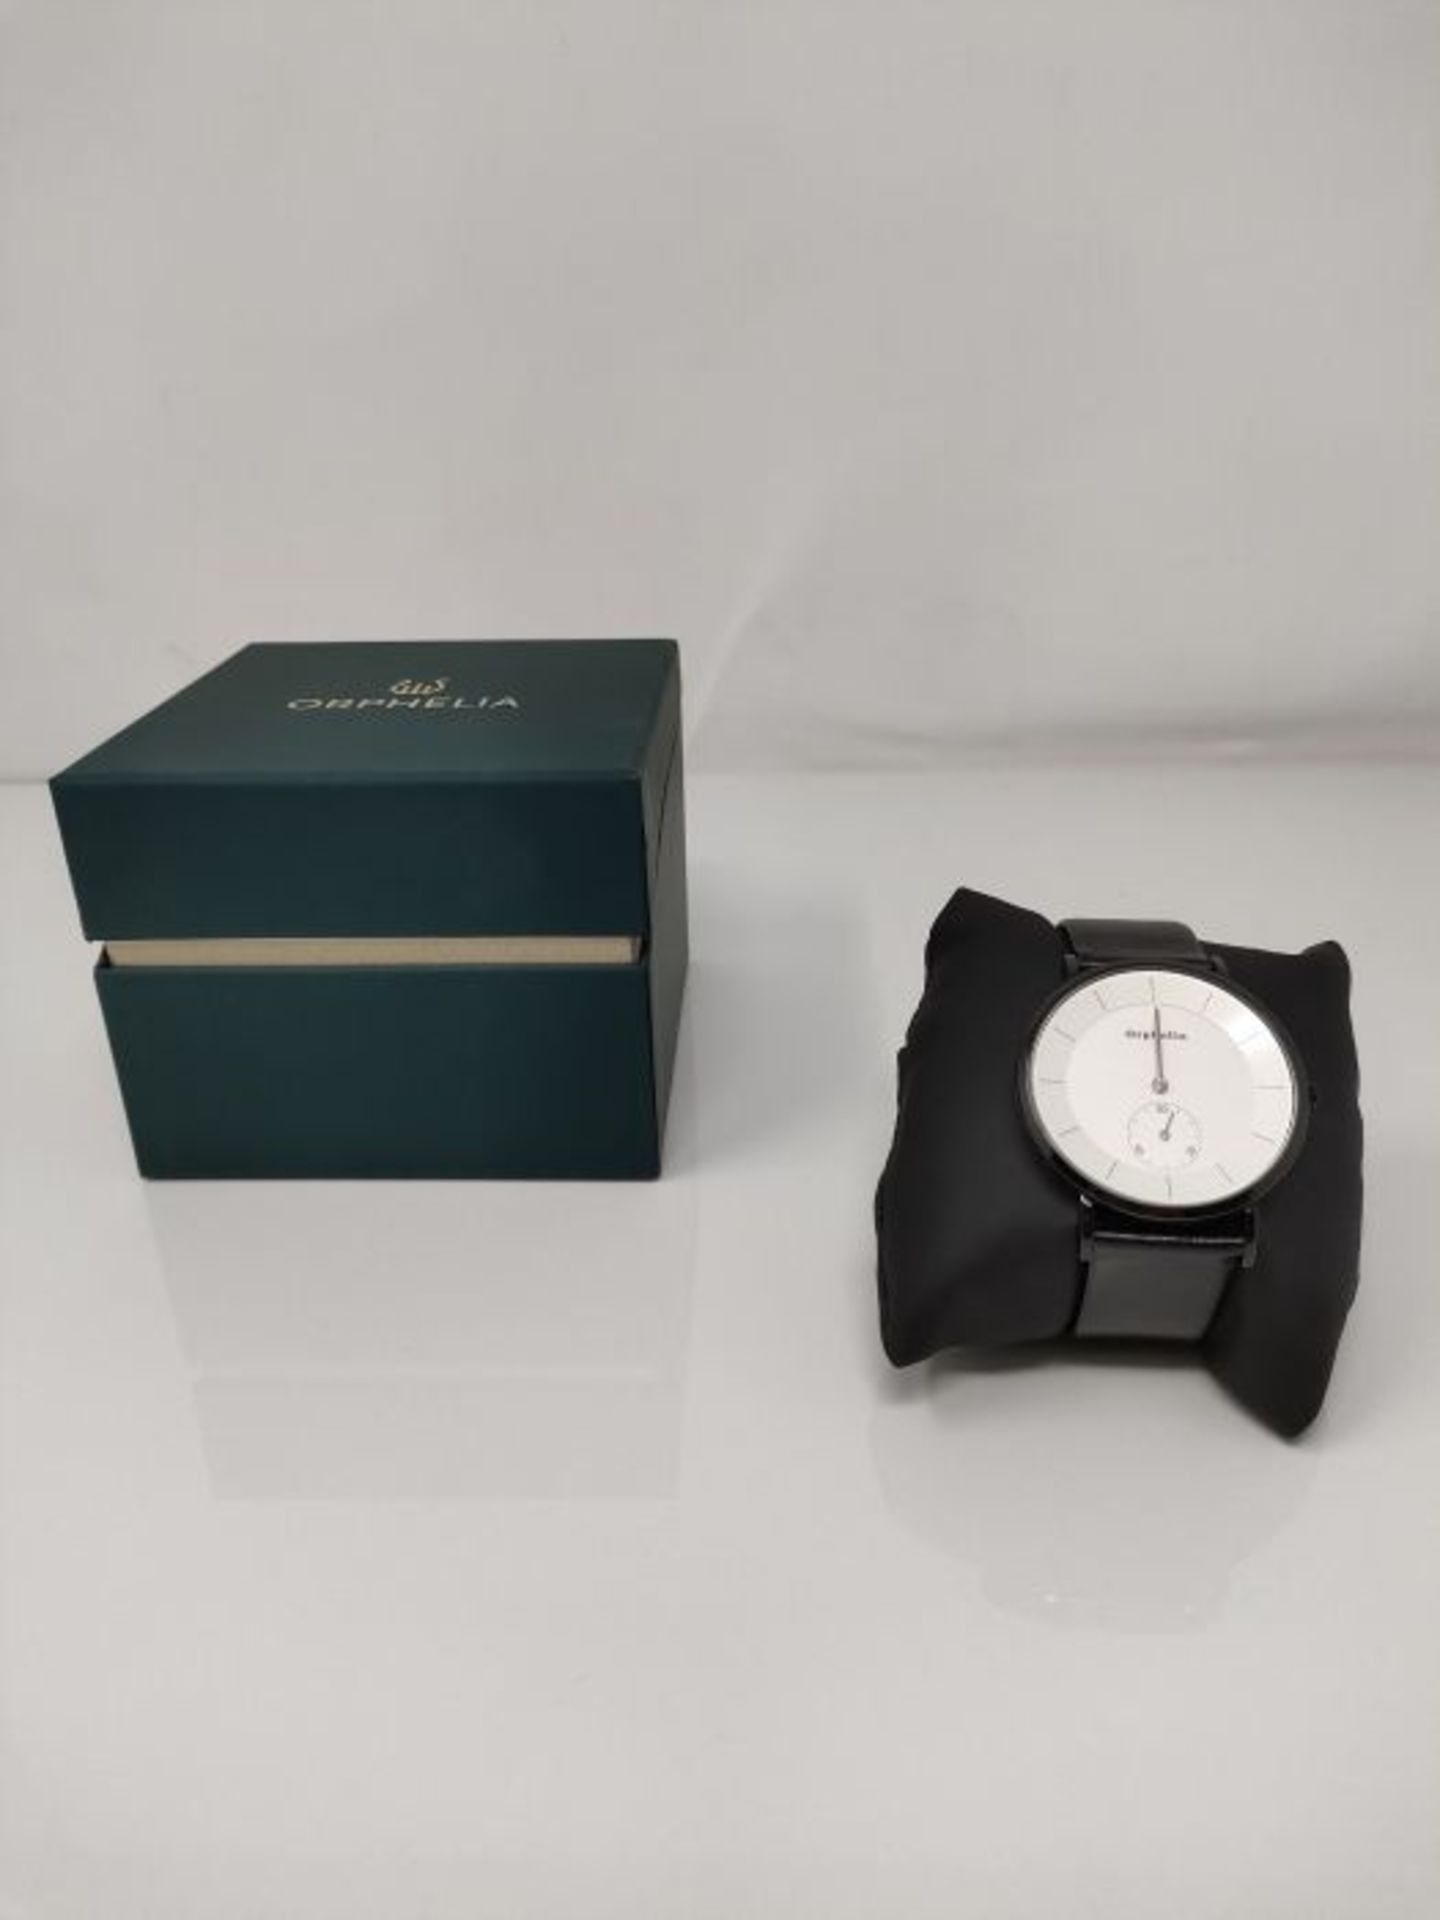 Orphelia Women's Quartz Watch with White Dial and Black Leather Strap - Image 3 of 6